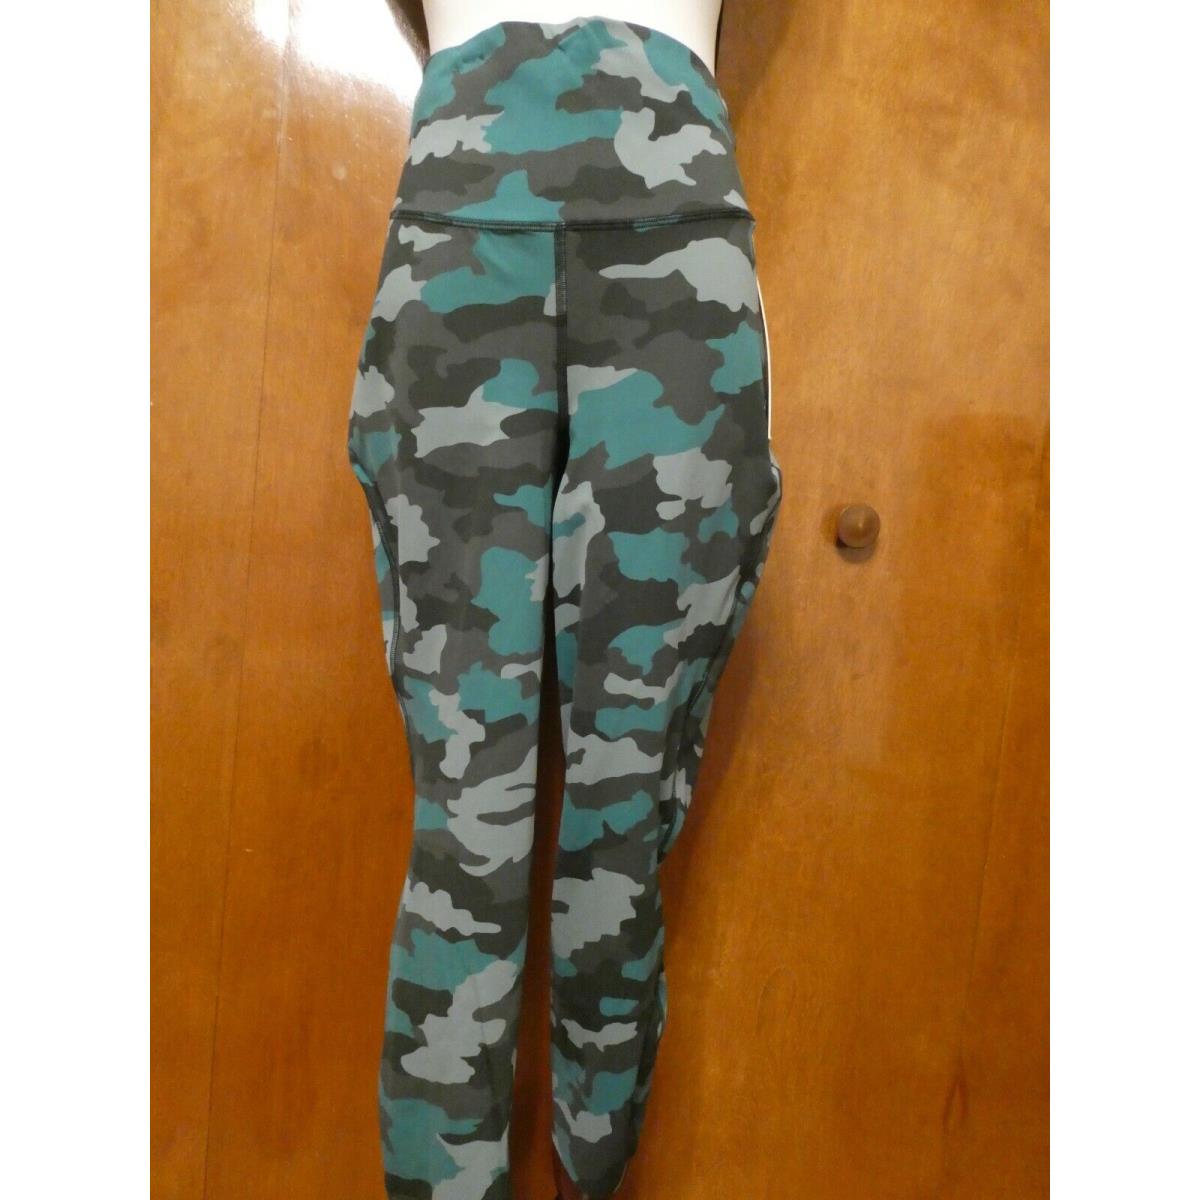 Lululemon Base Pace High-rise HR Crop 23 Camouflage Running Pant Tight